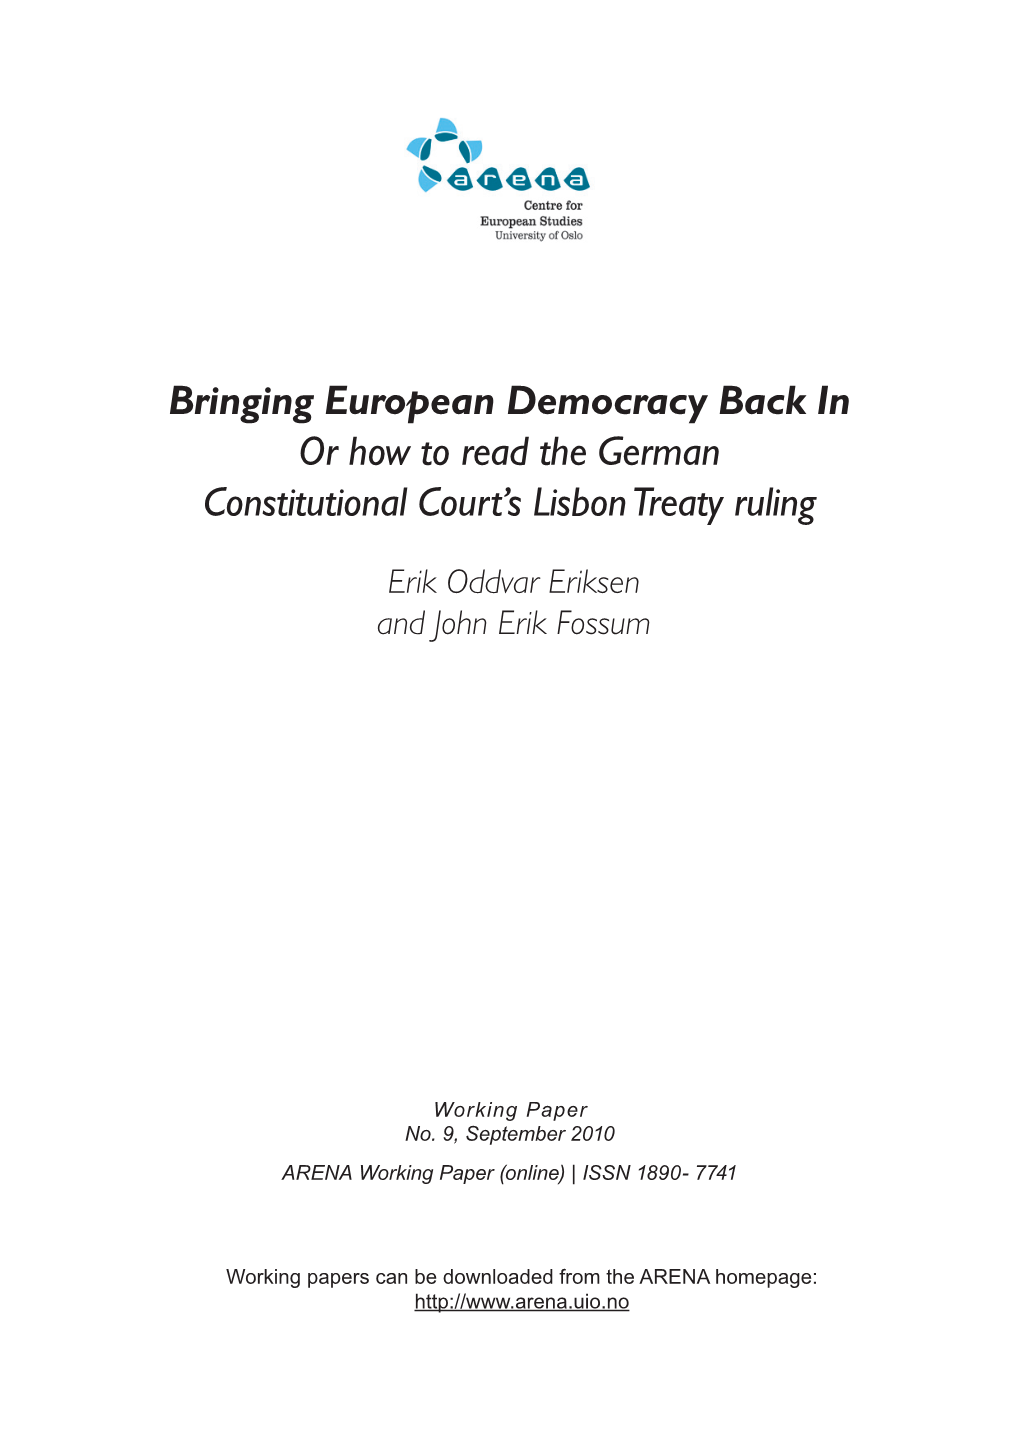 Bringing European Democracy Back in Or How to Read the German Constitutional Court’S Lisbon Treaty Ruling